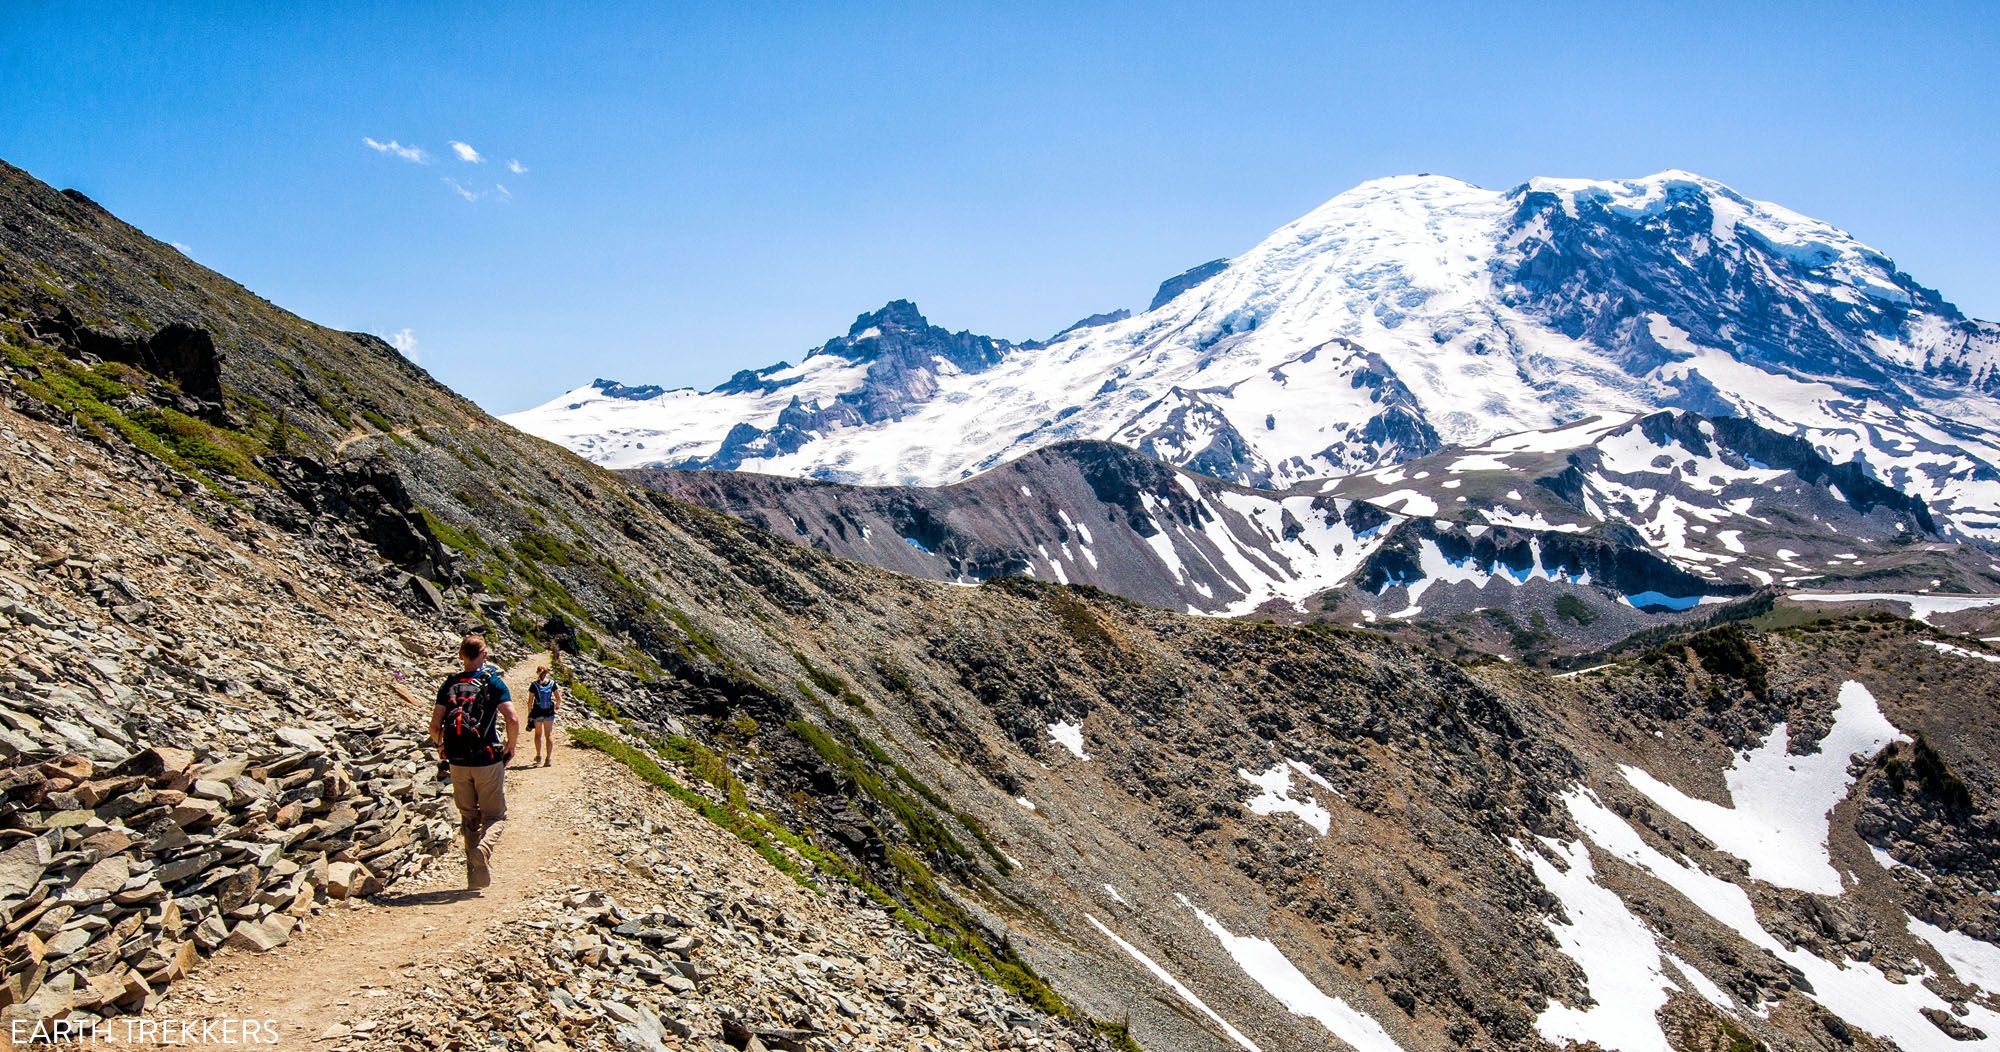 Featured image for “Hiking the Mount Fremont Lookout Trail | Mount Rainier National Park”